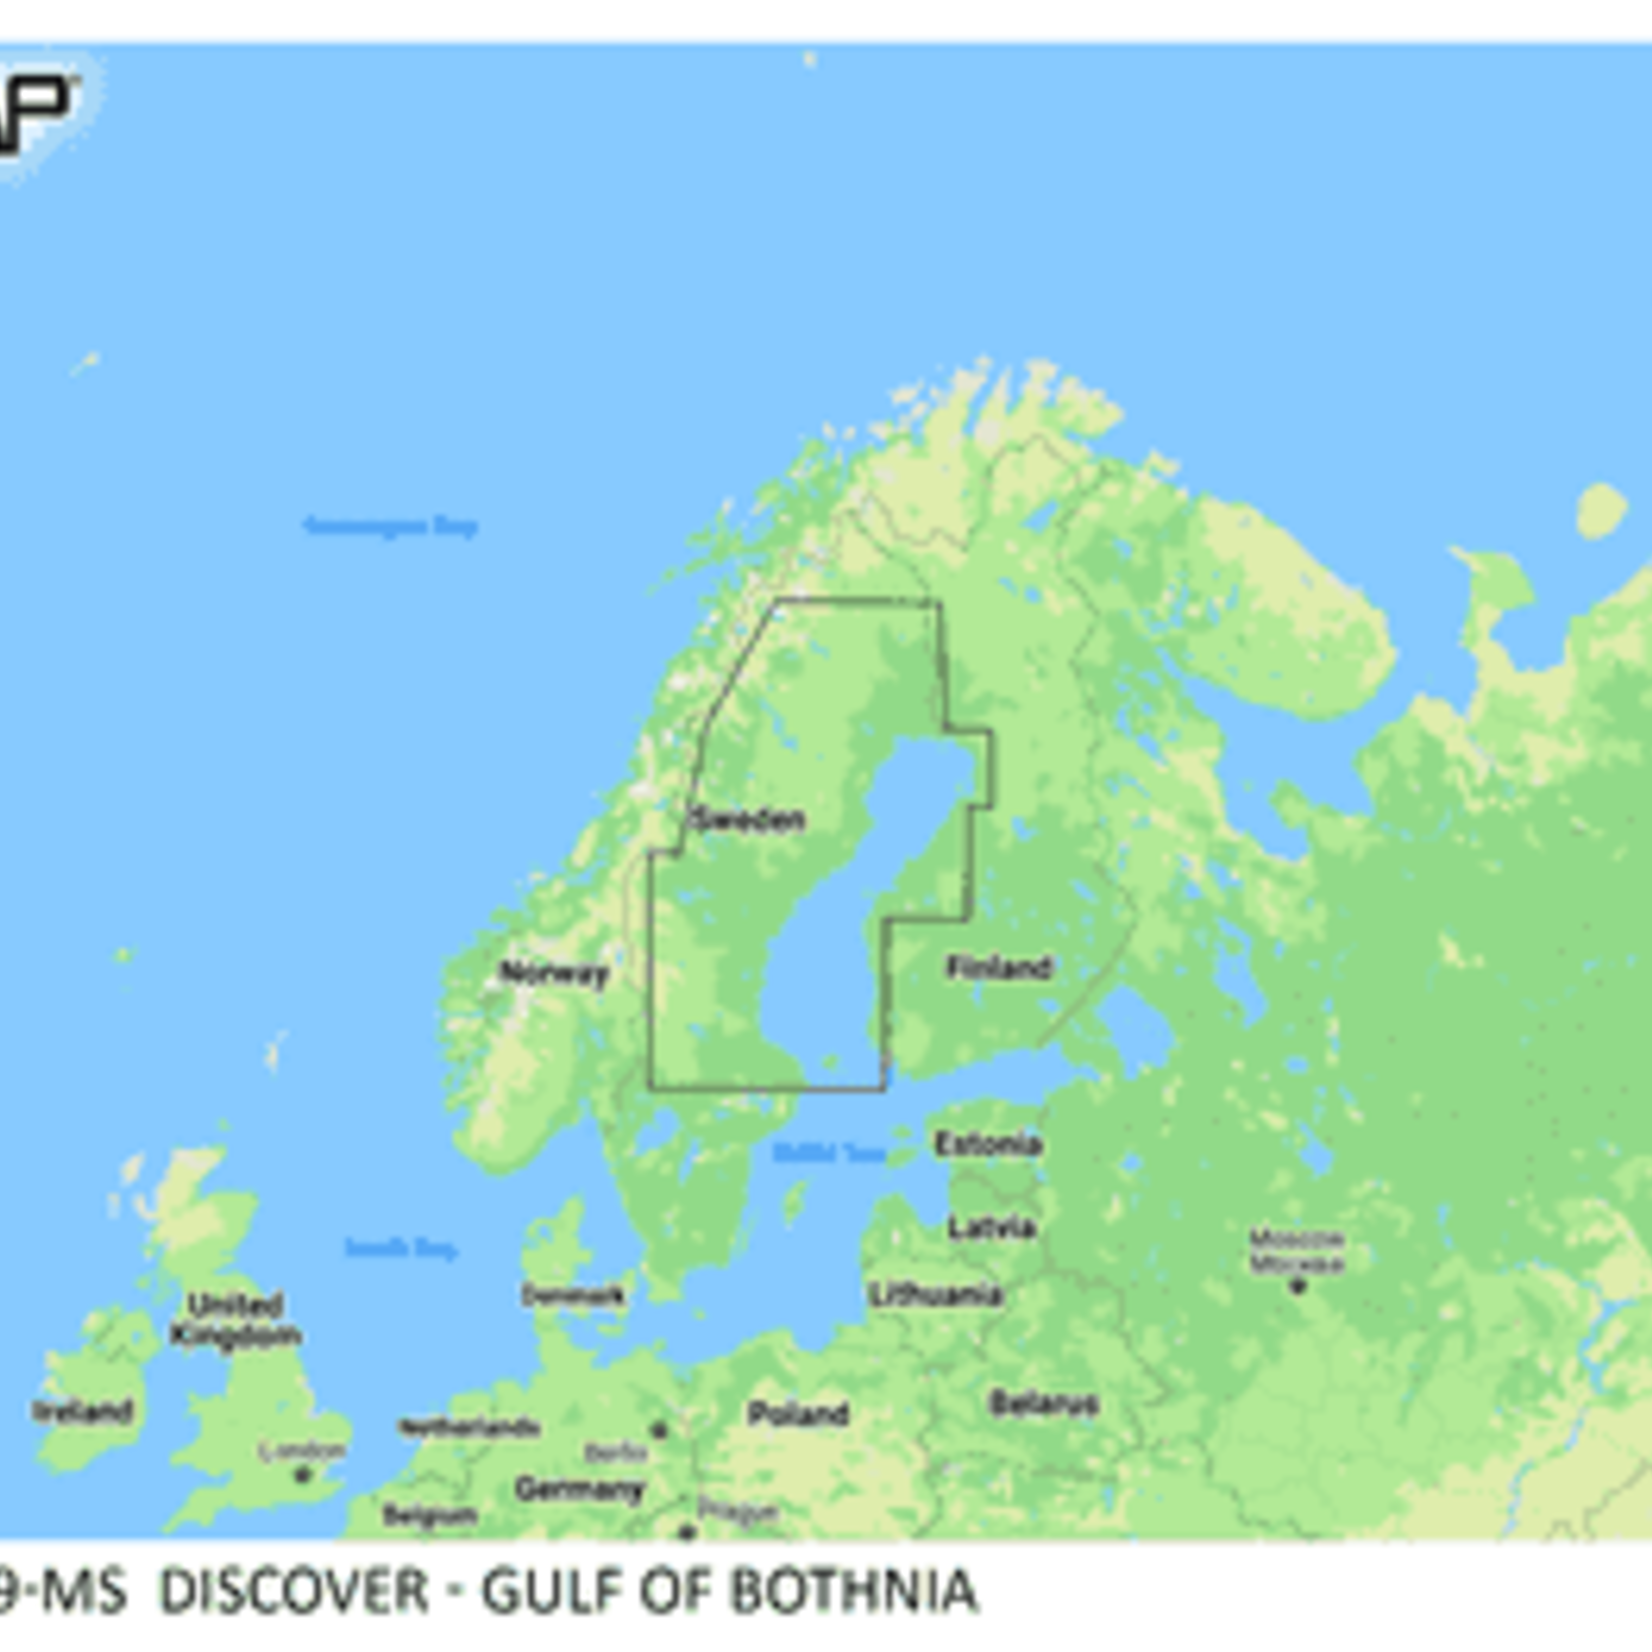 C-MAP DISCOVER - Gulf of Bothnia